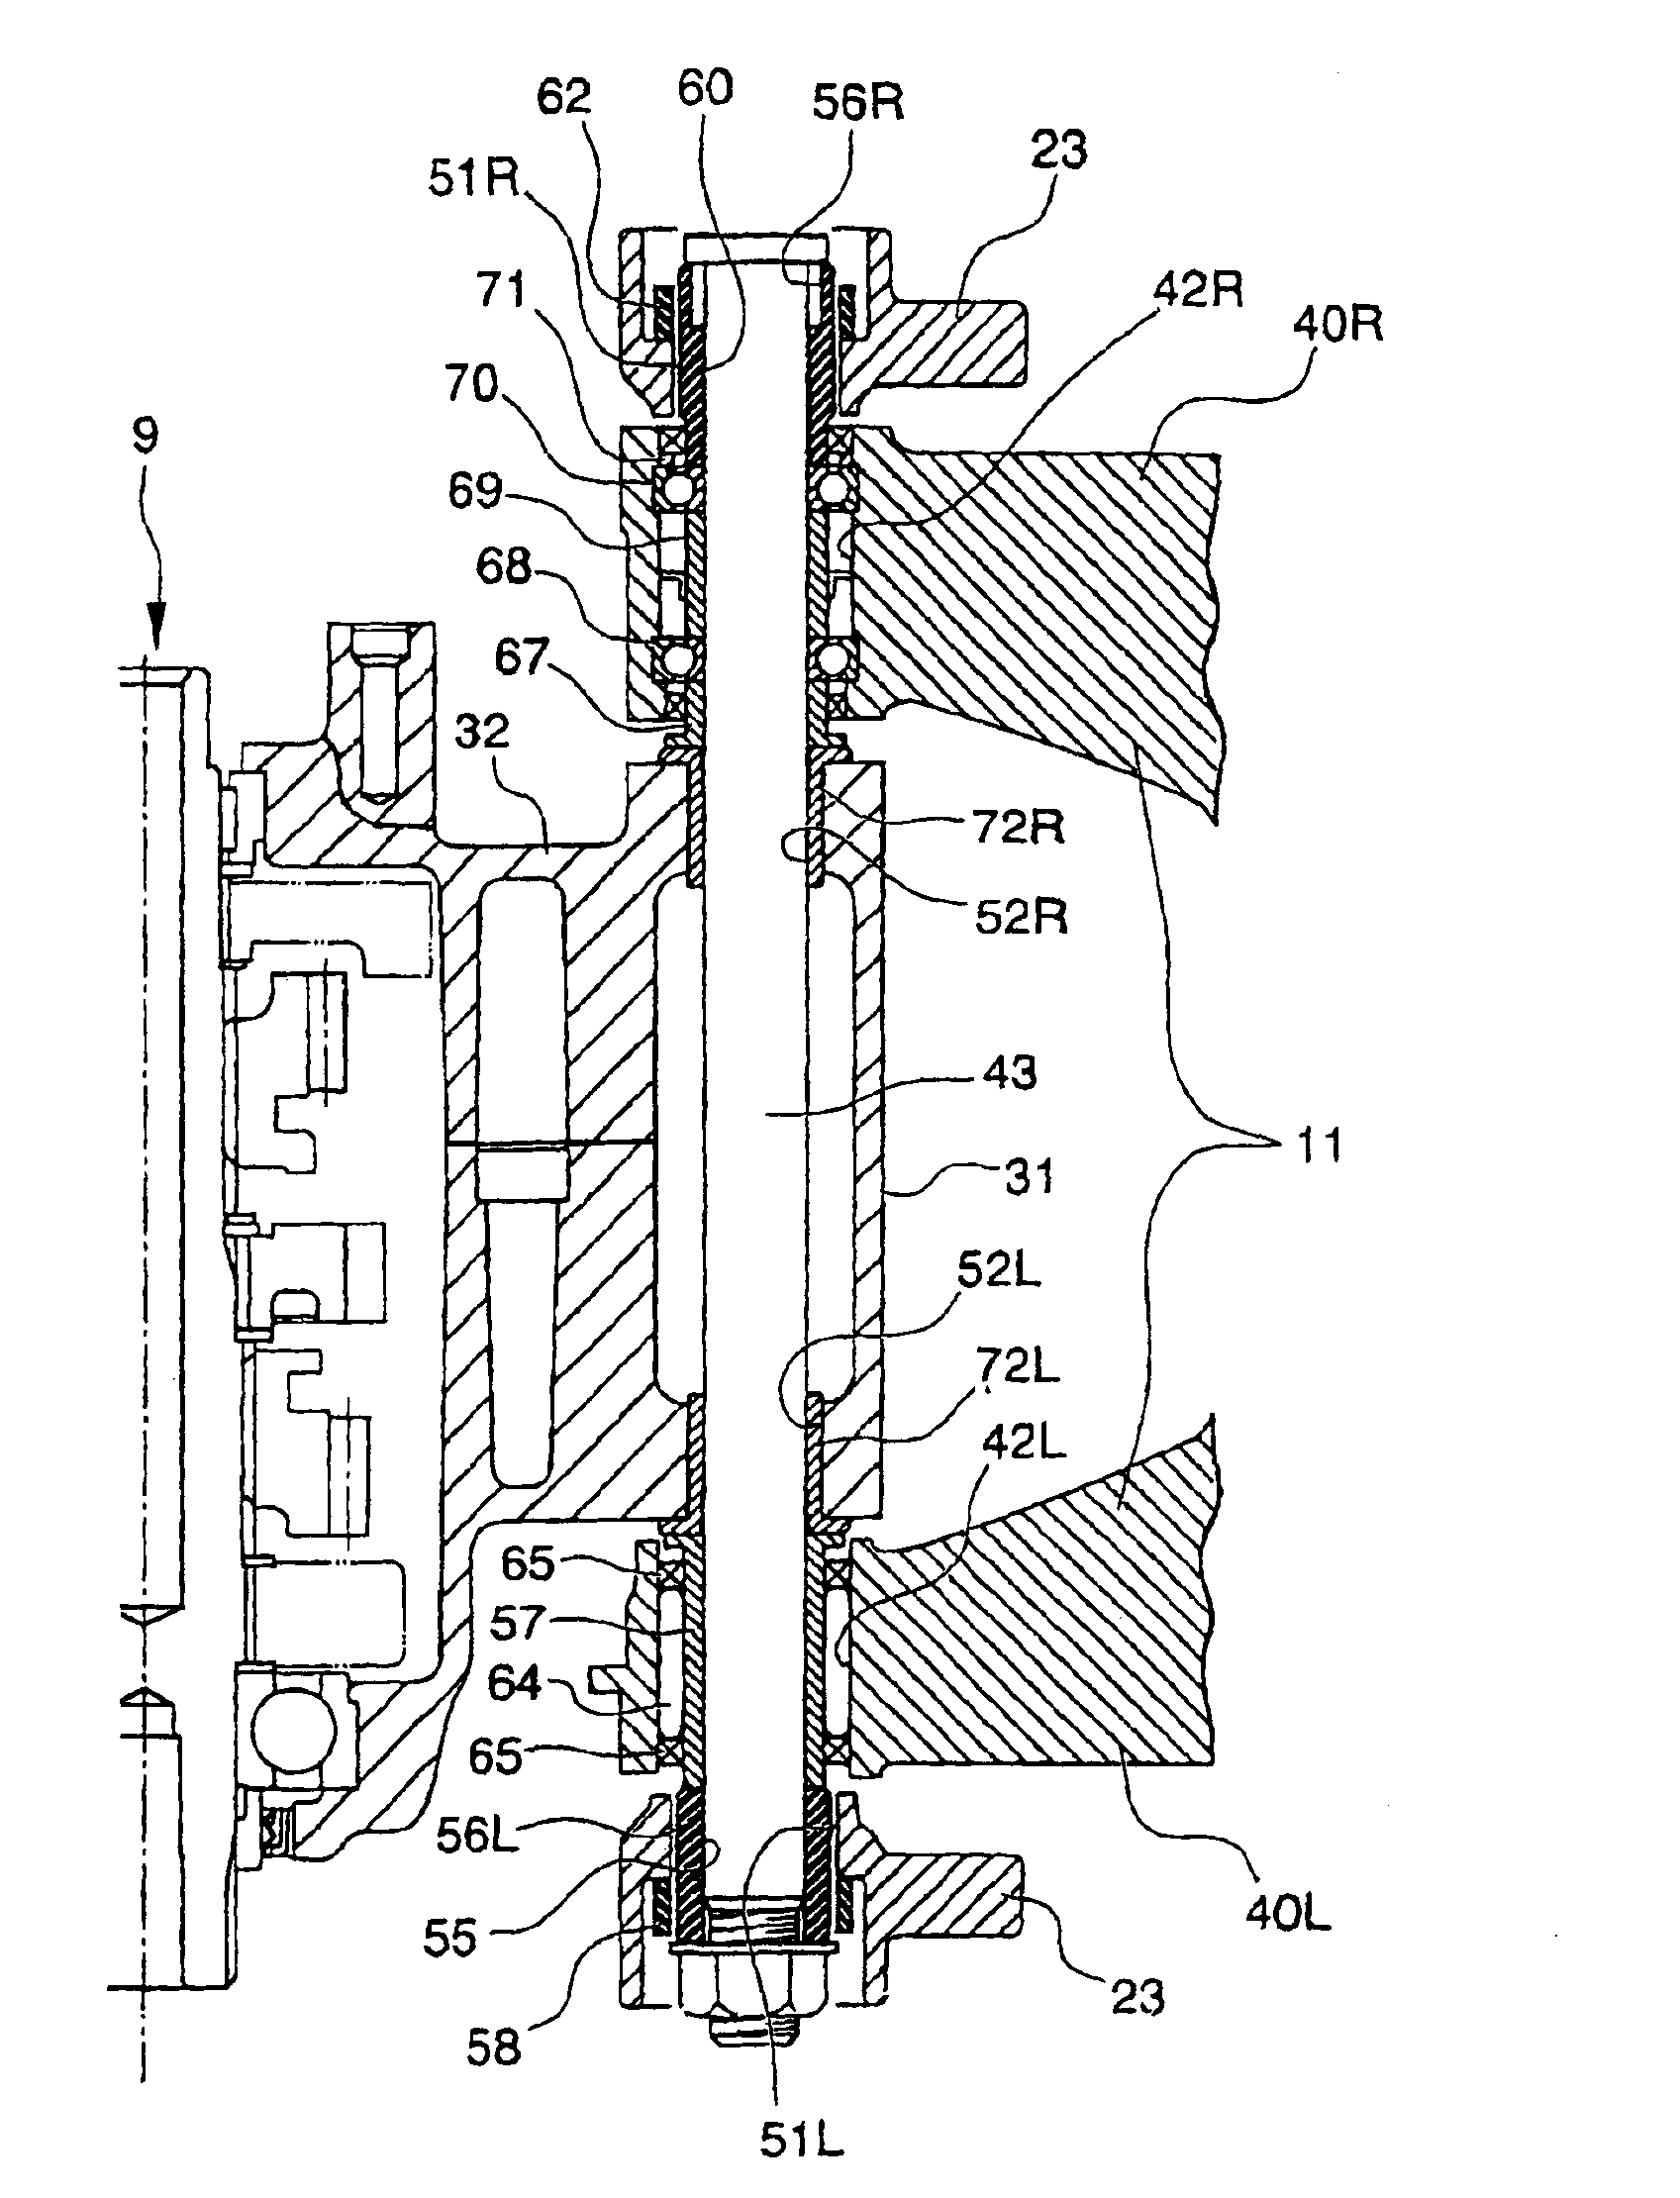 Structure of mounting rear fork in vehicle such as motorcycle